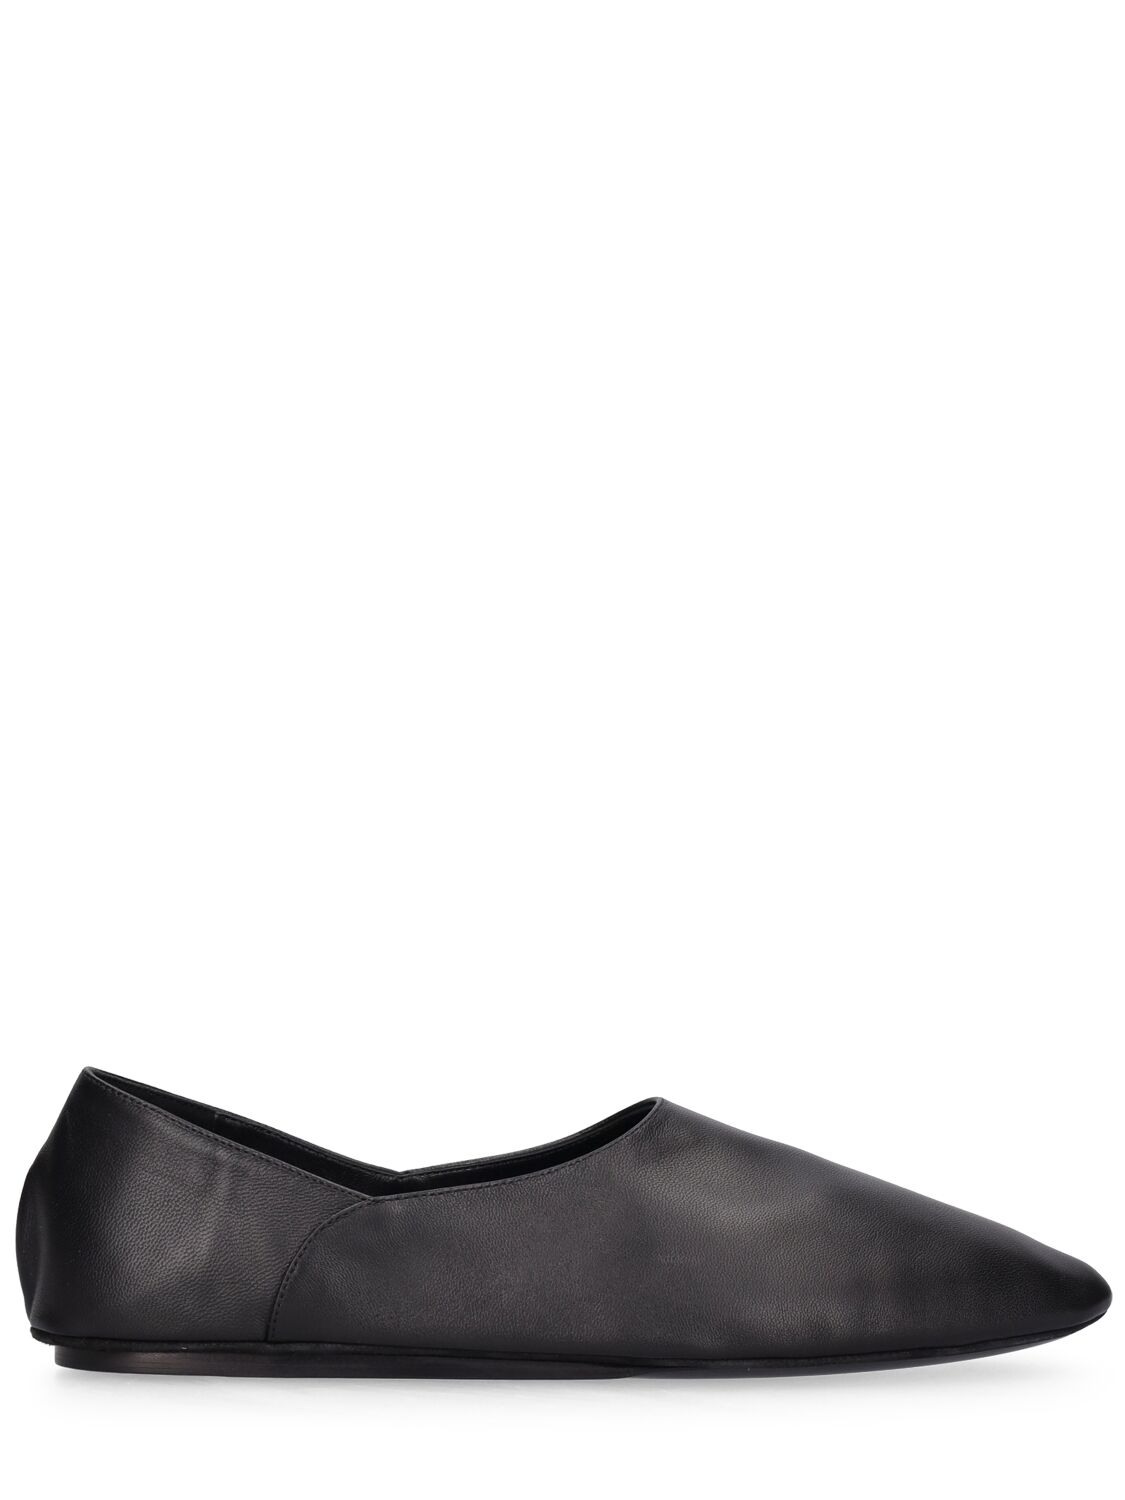 Image of 10mm Leather Ballerina Flats